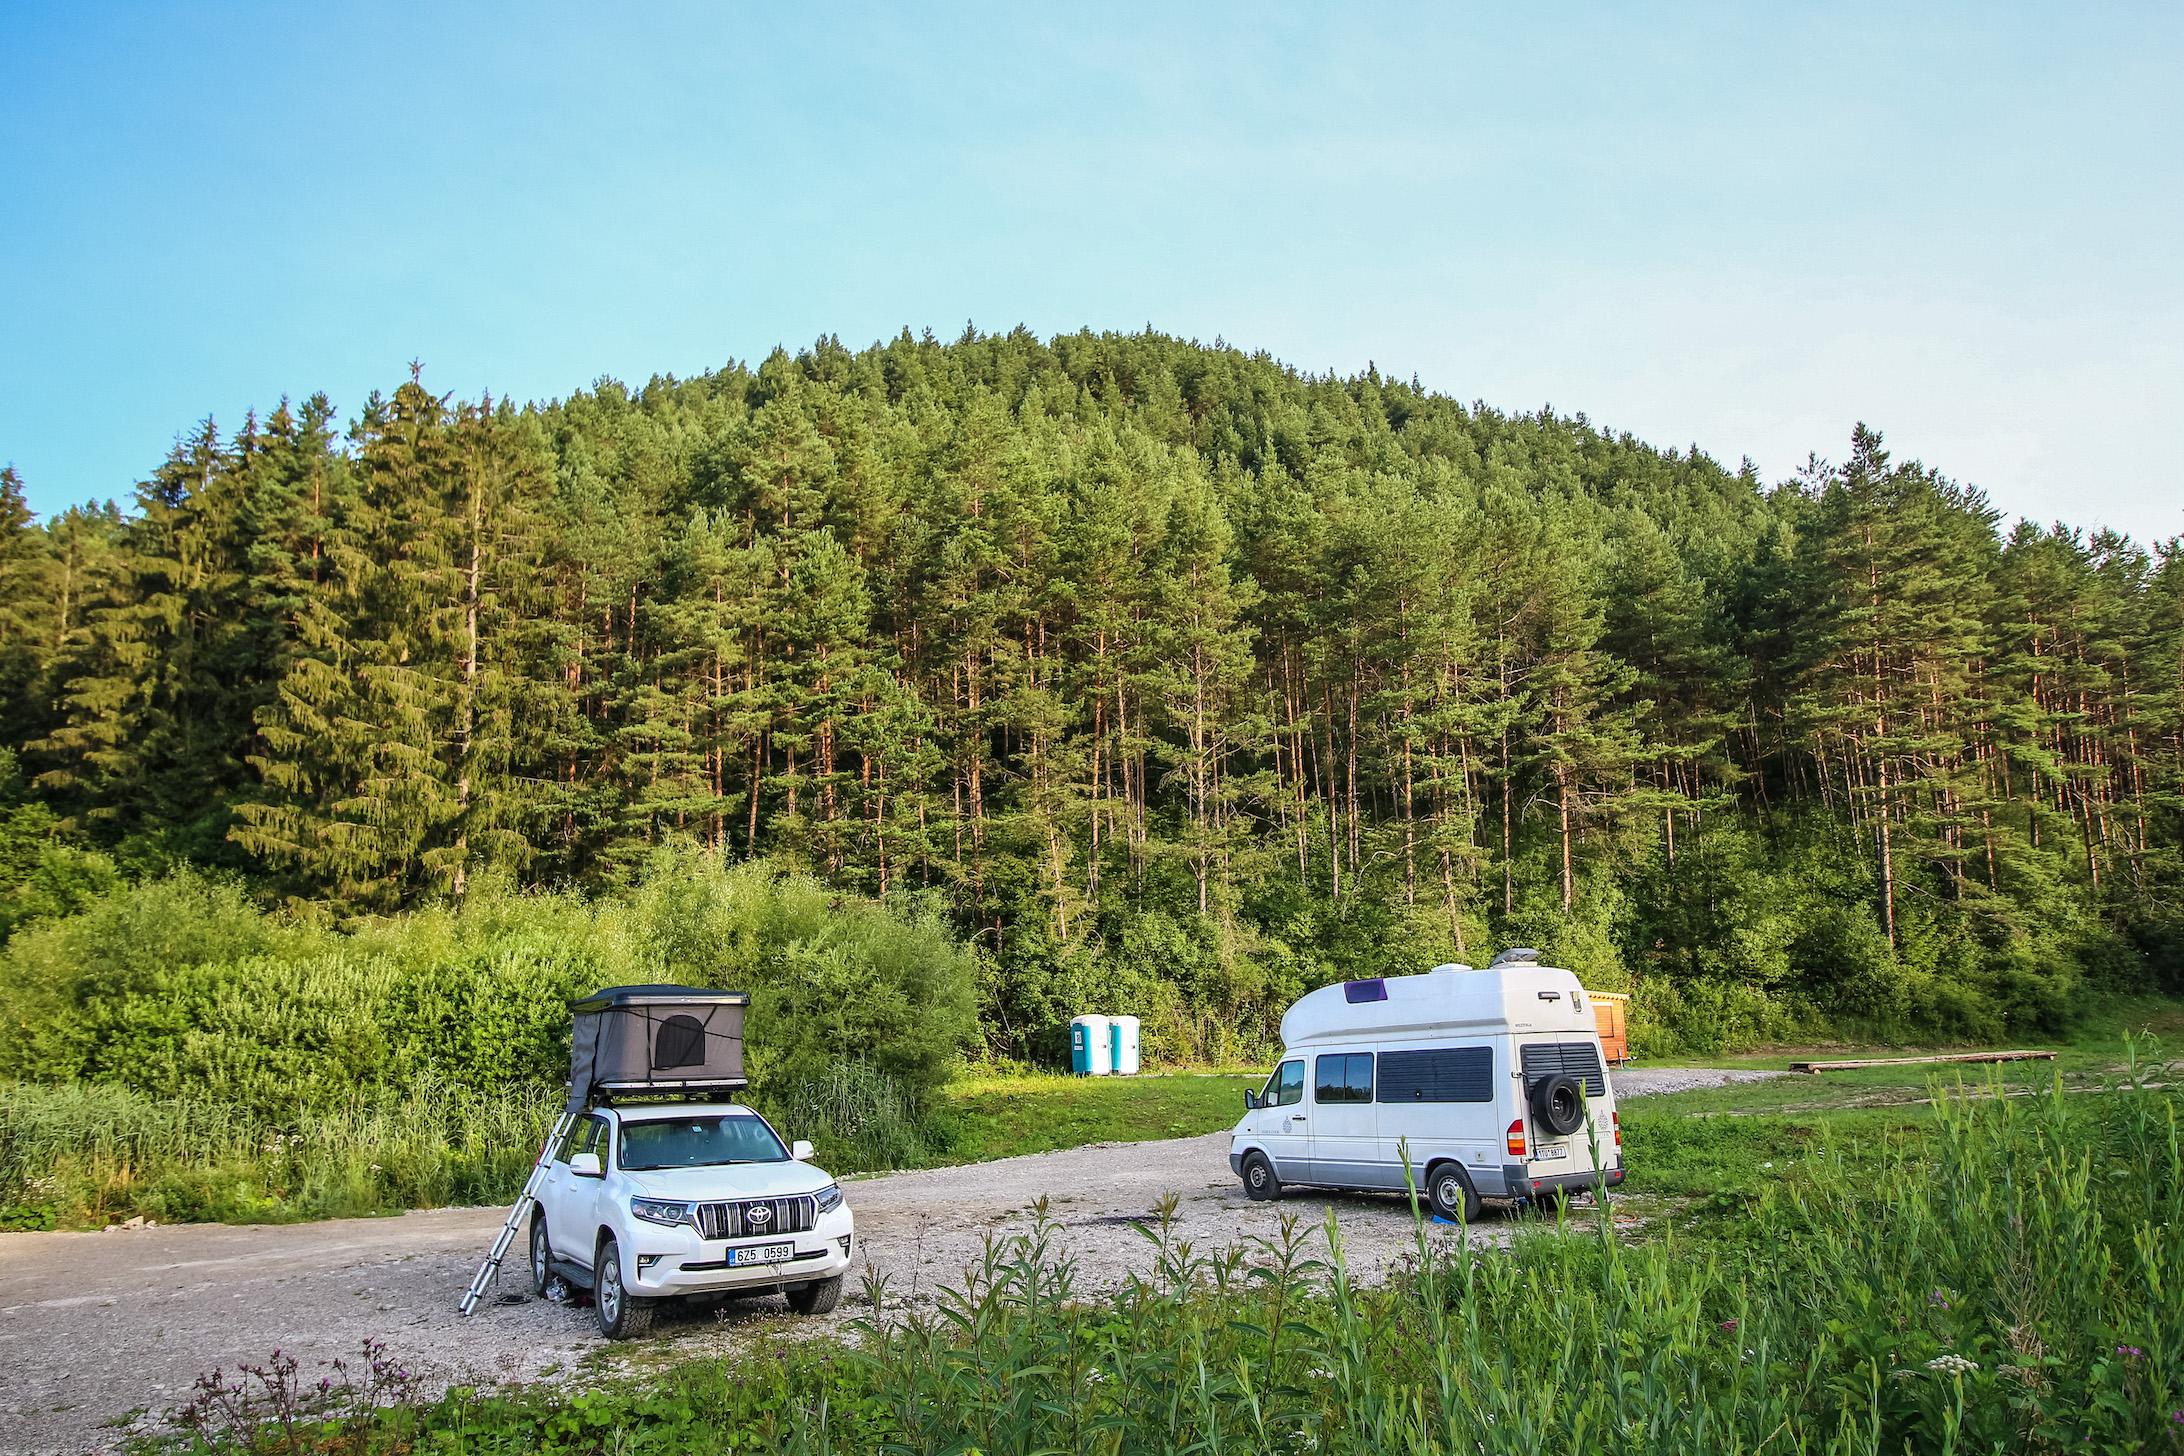 People camping in a 4x4 Toyota Landcriuser with a roof tent and Mercedes Sprinter James Cook edition RV camper van near the thermal lake Kalameny